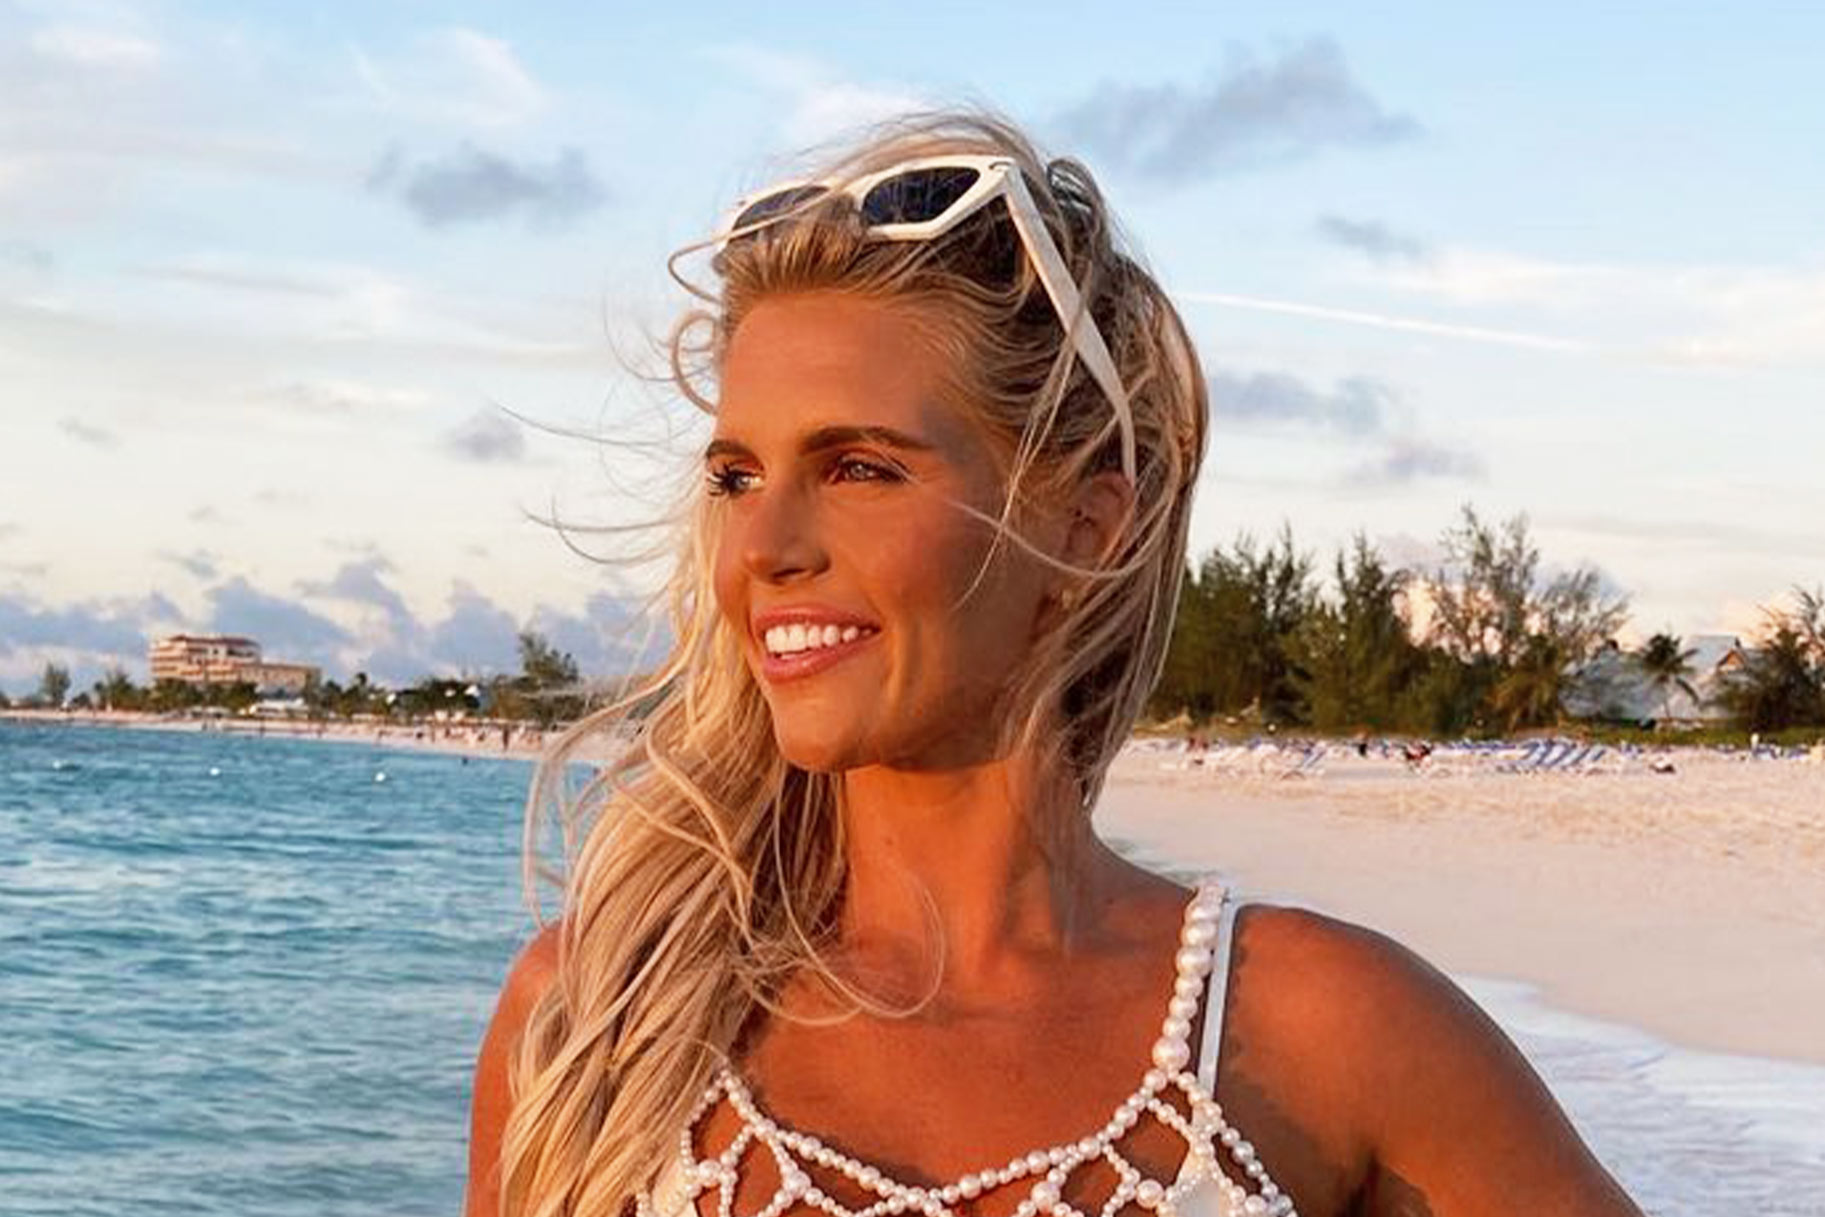 Southern Charm's Madison LeCroy is the ultimate bikini babe as she